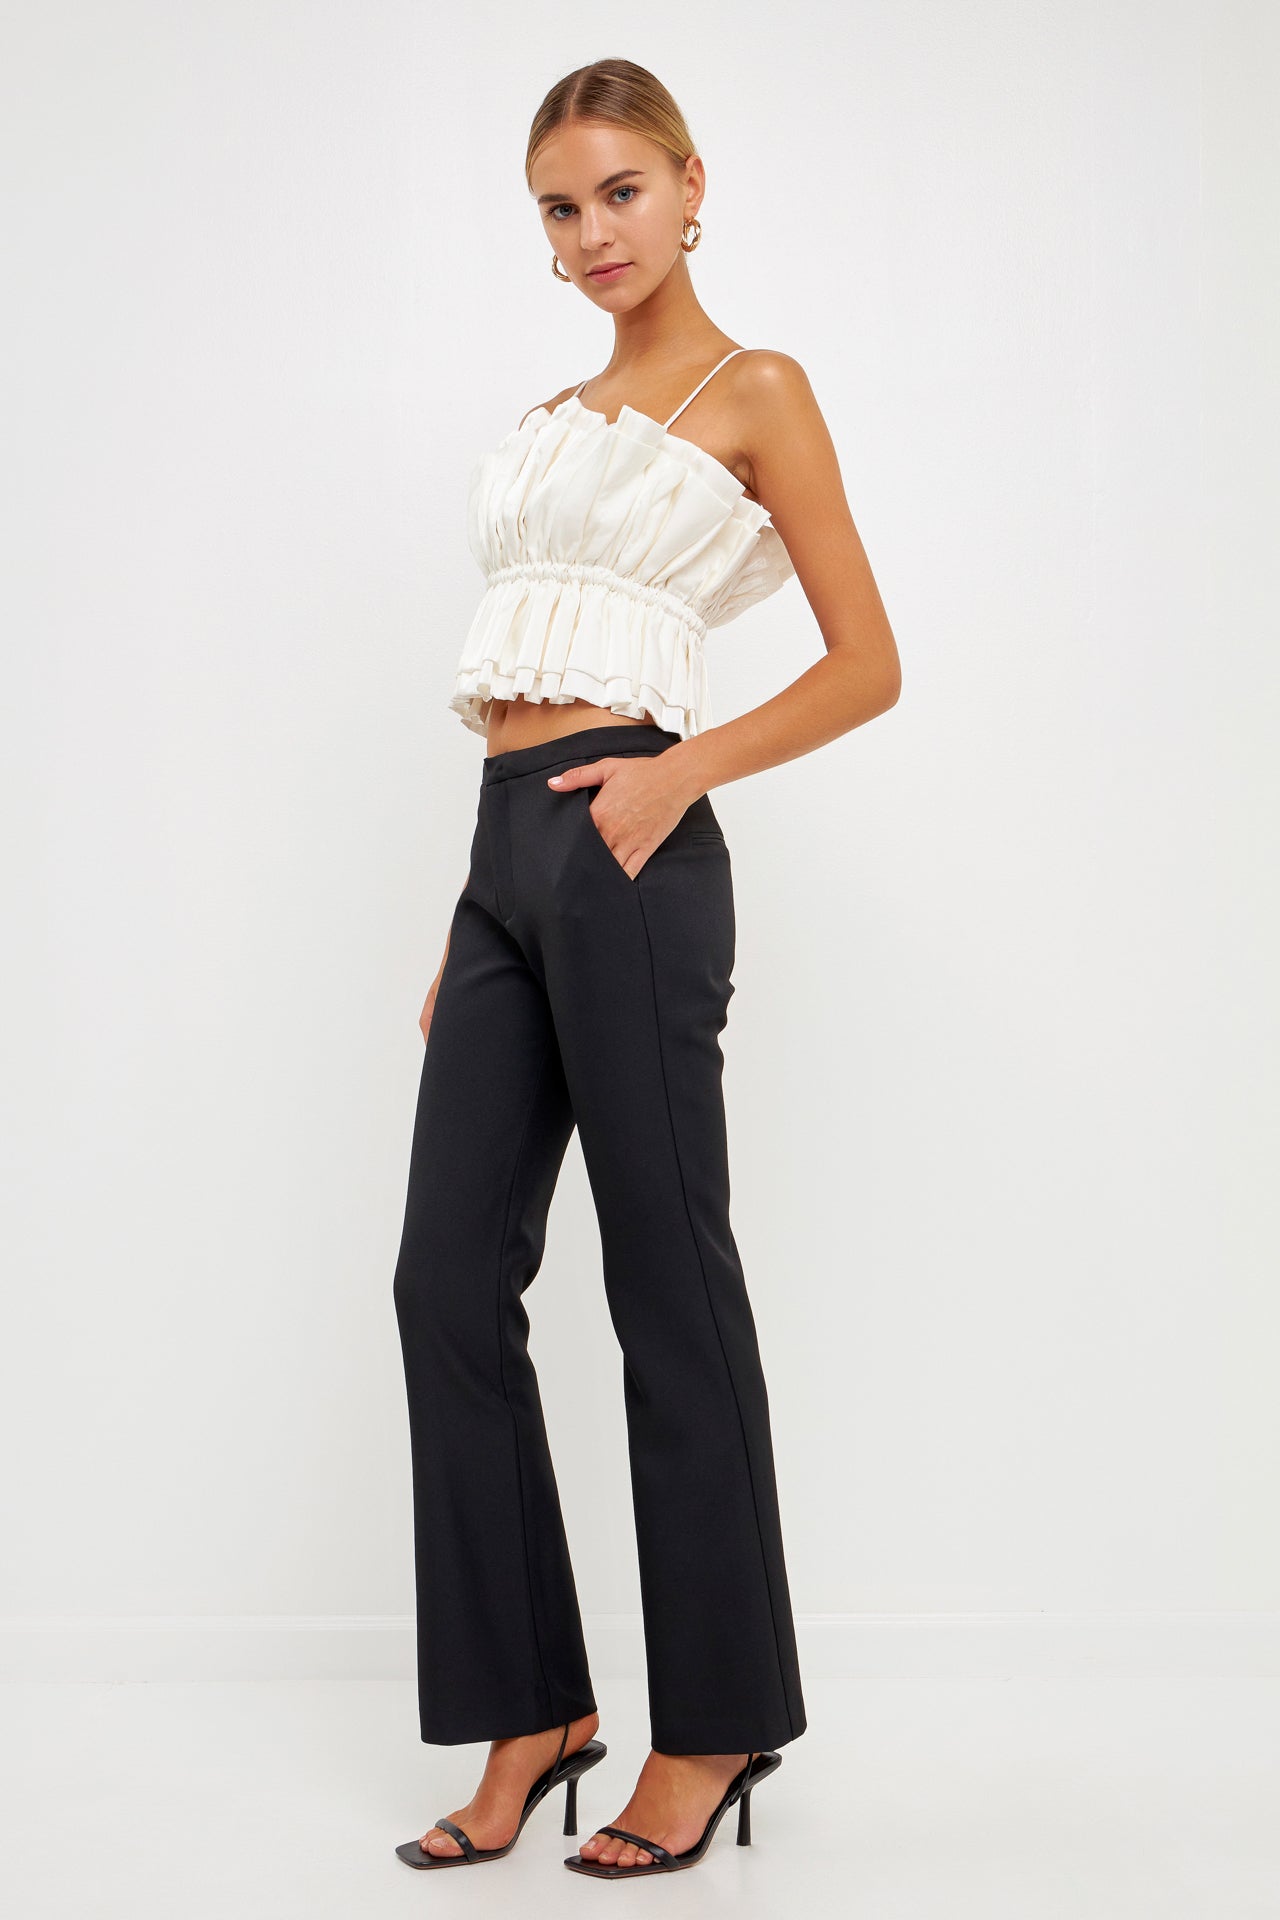 ENDLESS ROSE - Sheen Ruffled Strapless Top - TOPS available at Objectrare